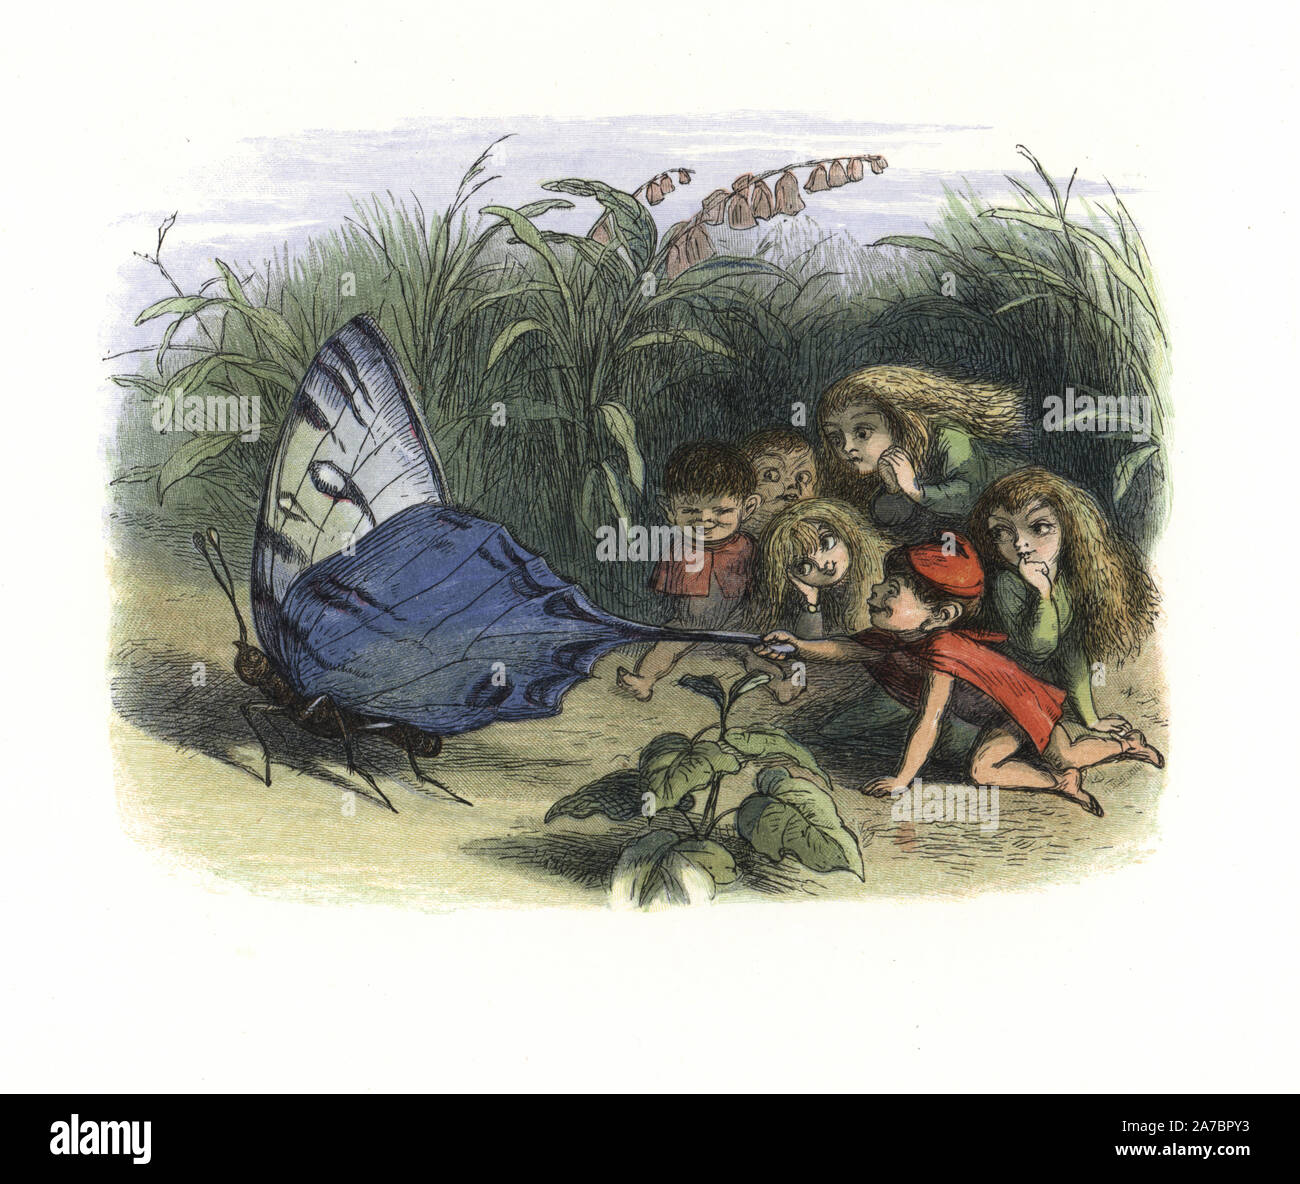 Elves and fairies teasing a butterfly by pulling its wing. Handcoloured woodblock print by Edmund Evans after an illustration by Richard Doyle from In Fairyland, a series of Pictures from the Elf World, Longman, London, 1870. Stock Photo